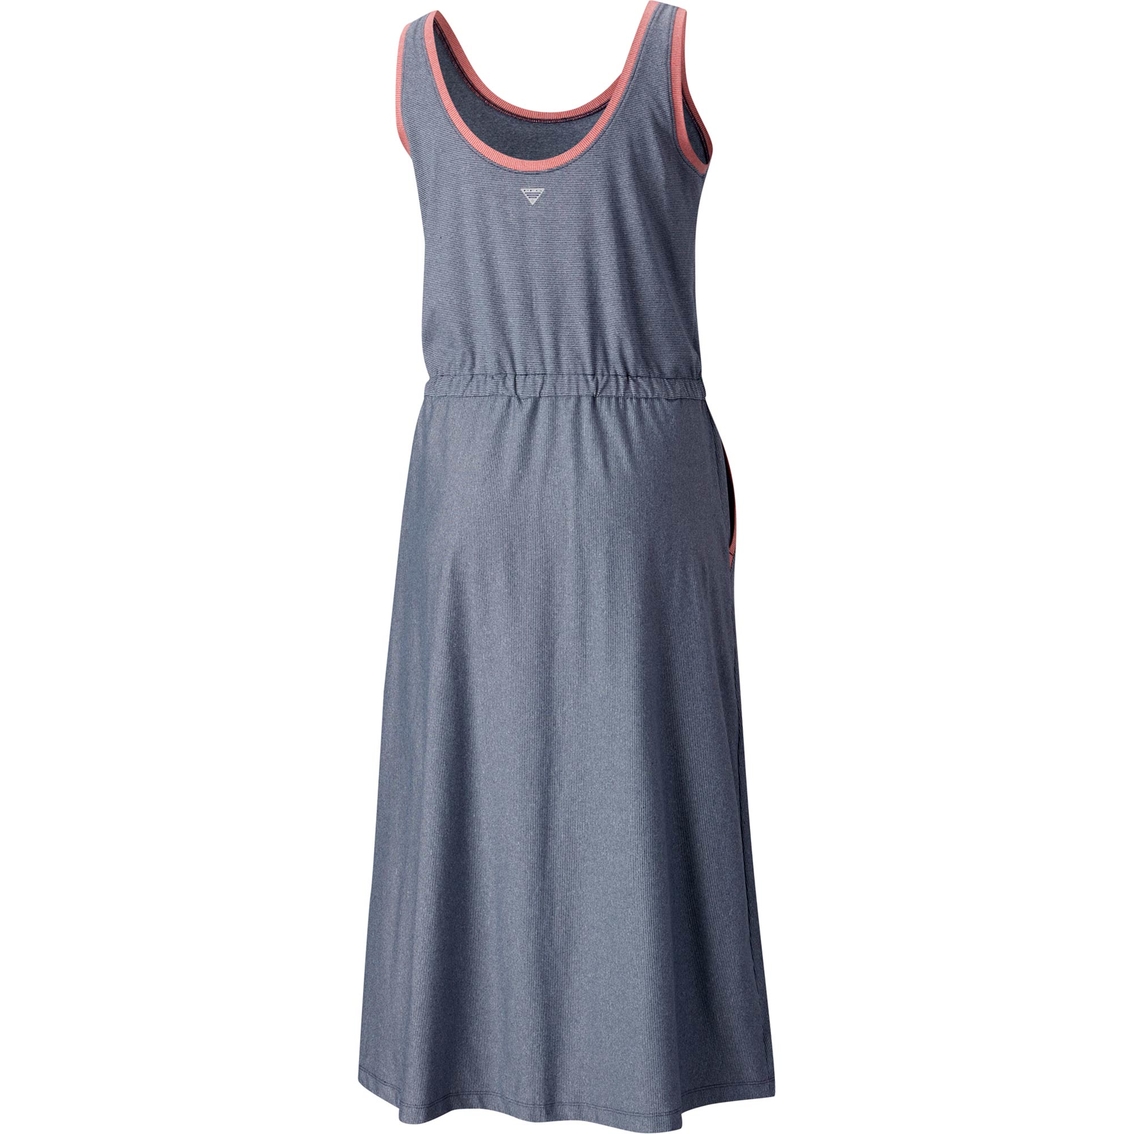 Columbia Reel Relaxed Dress - Image 2 of 2